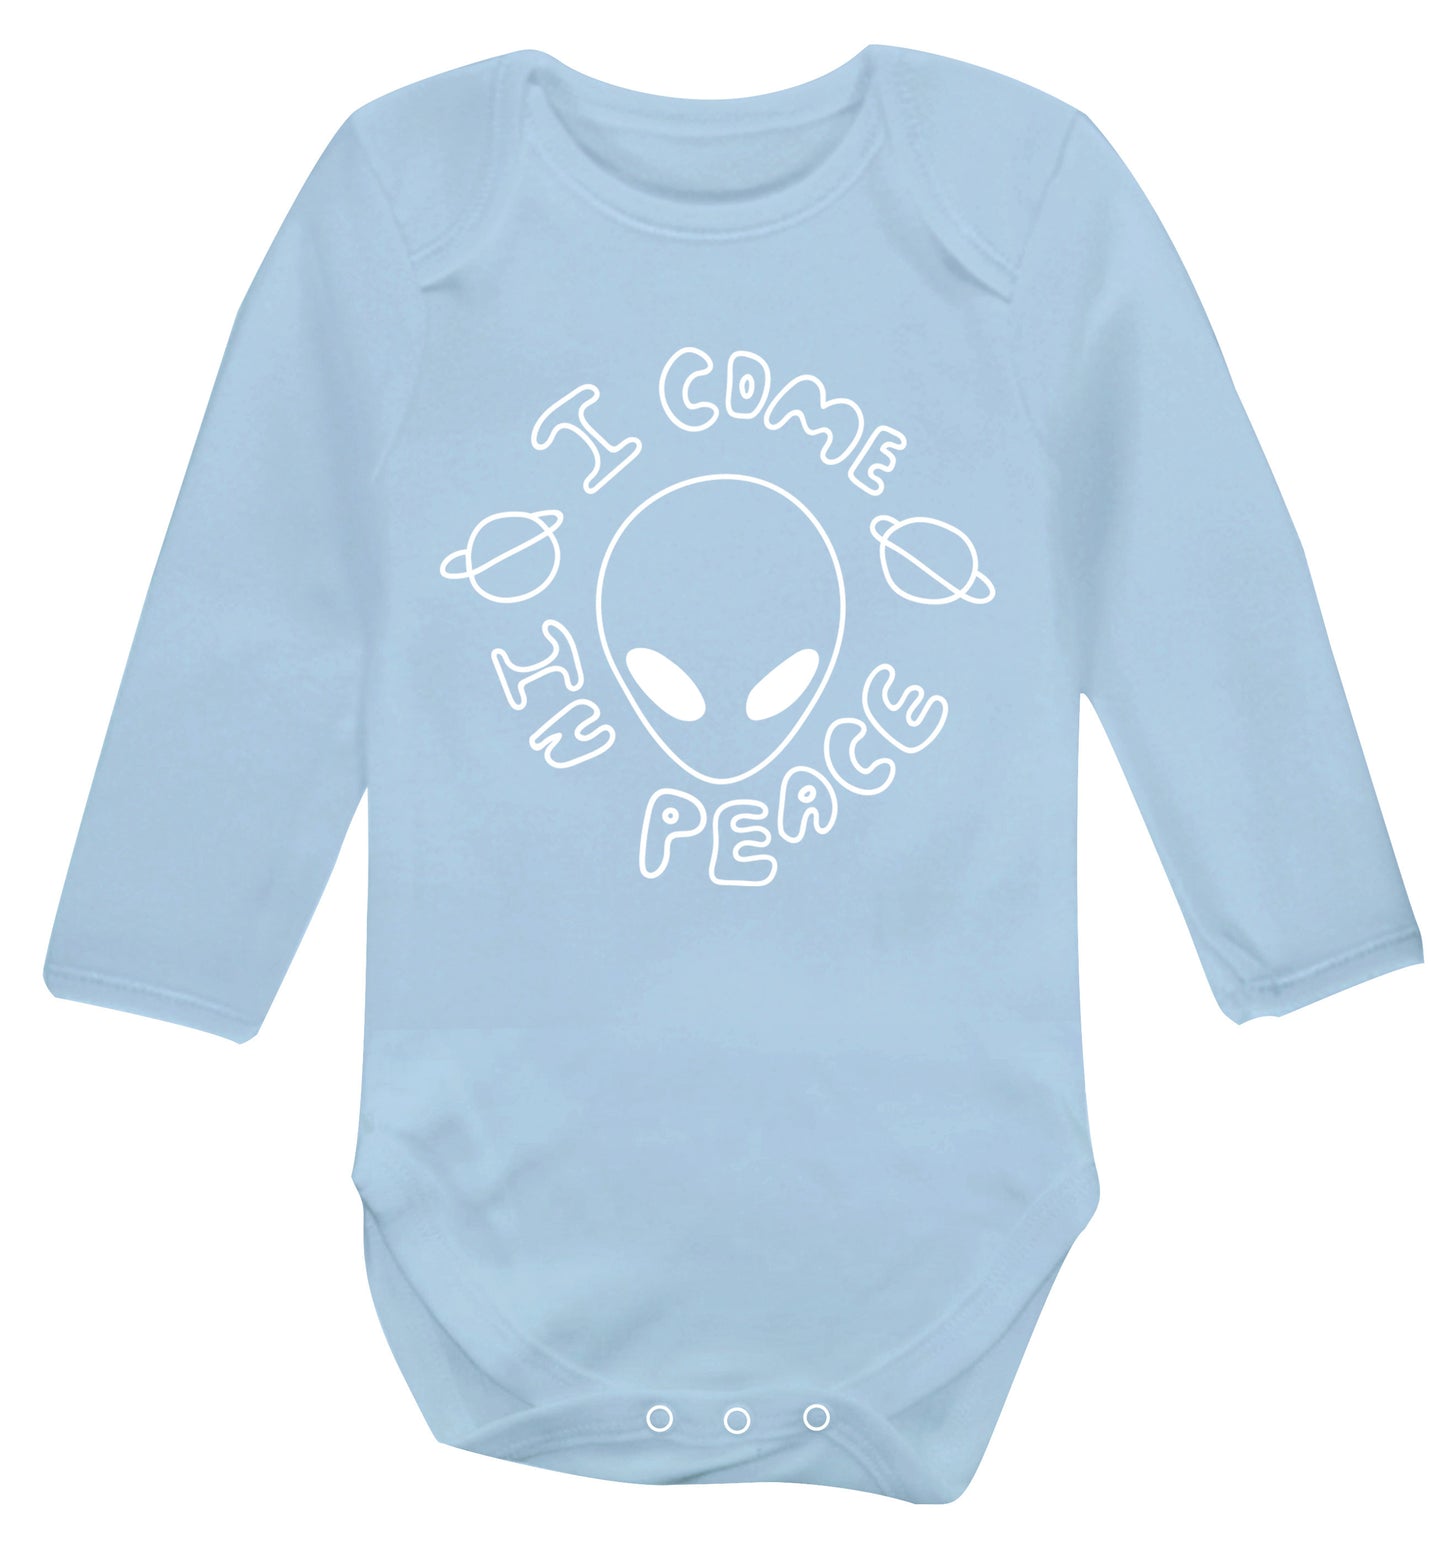 I come in peace Baby Vest long sleeved pale blue 6-12 months